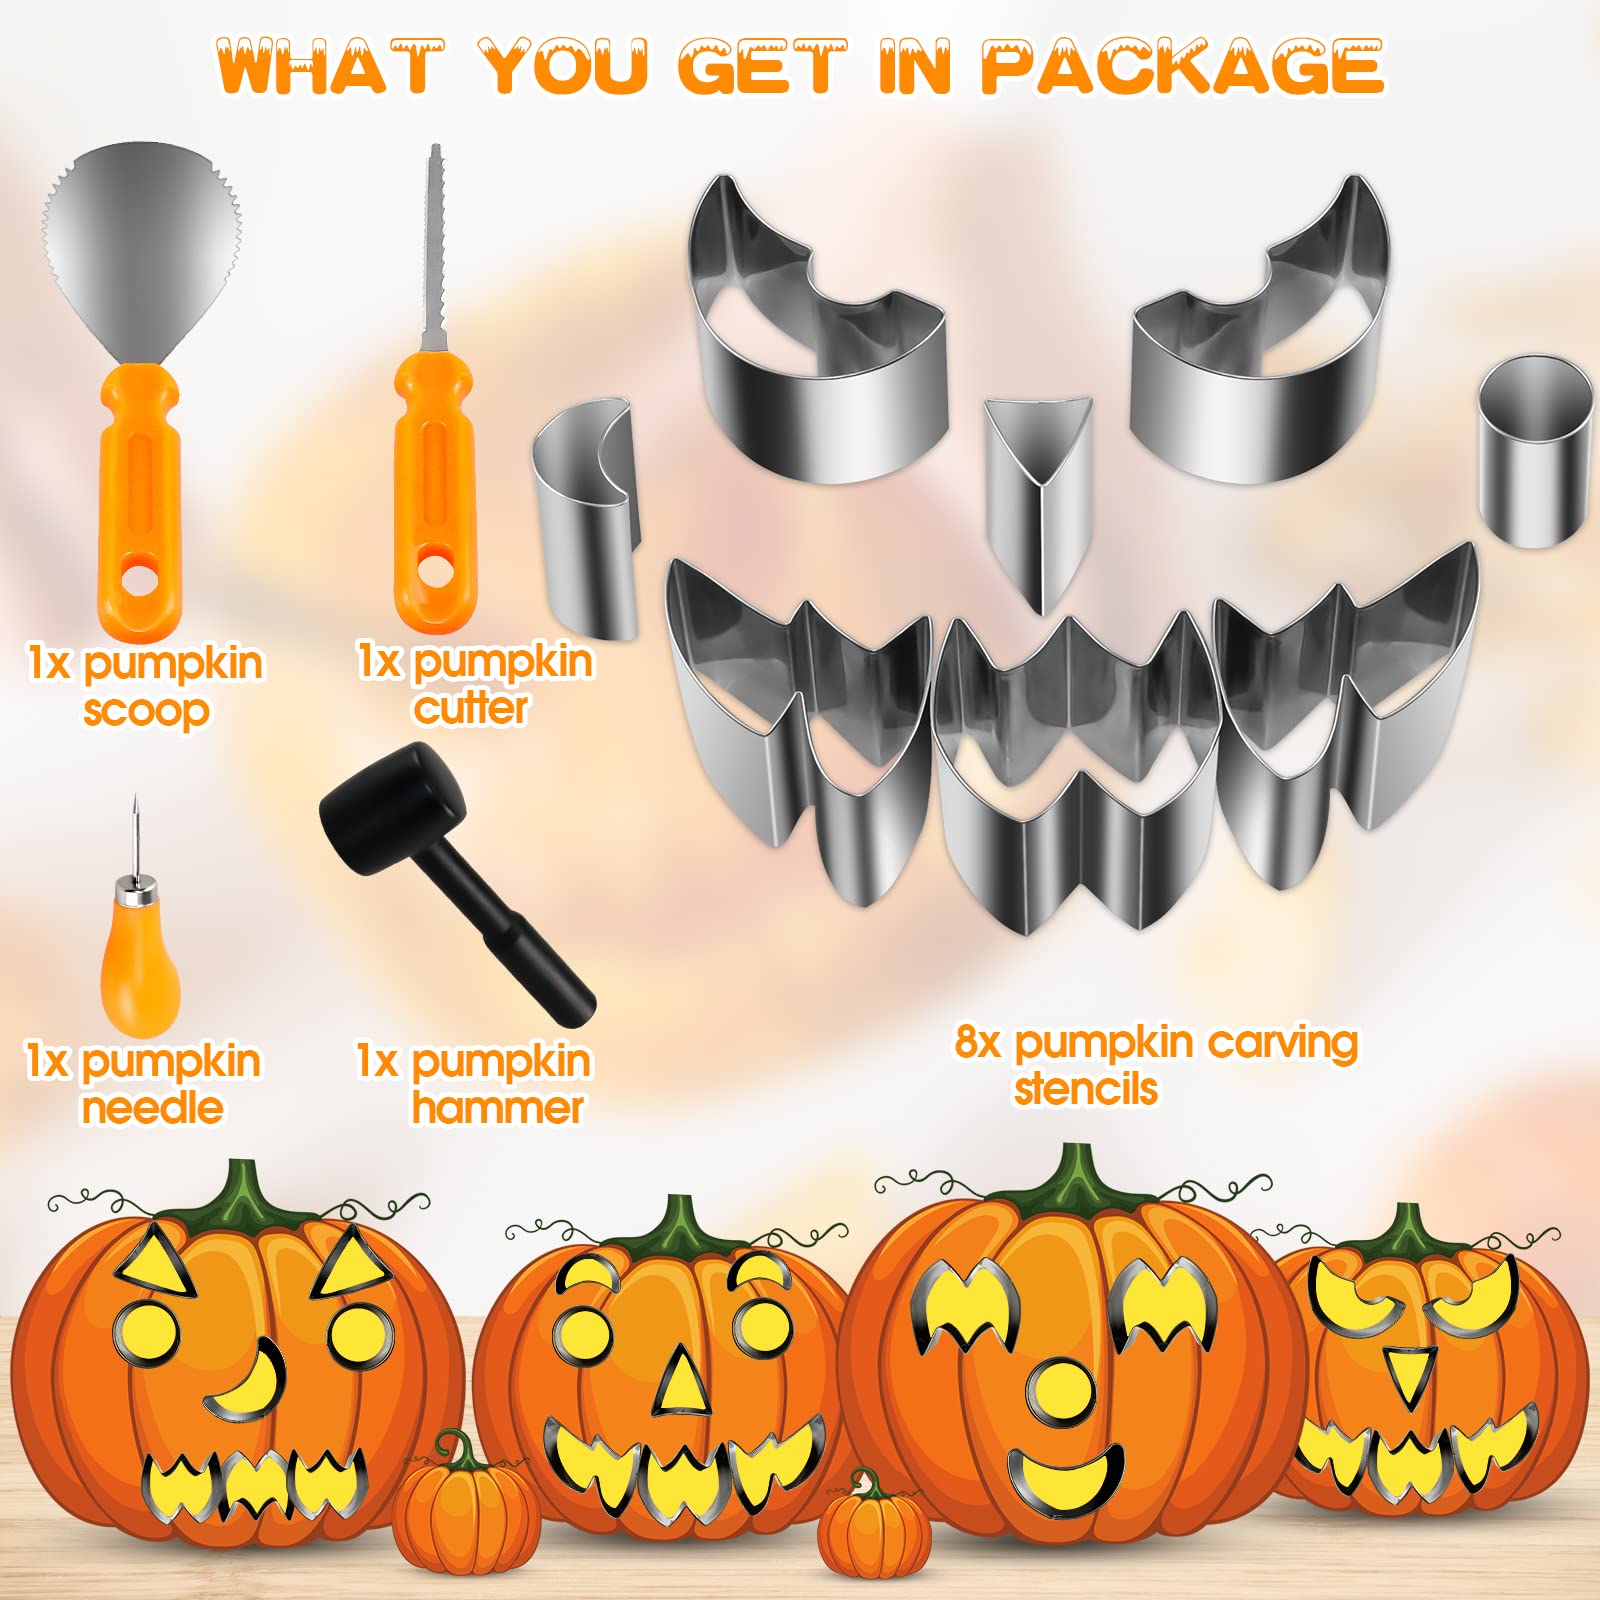 【2022 NEW】 Professional Halloween Pumpkin Carving Kit/Pumpkin Carving Tools/Pumpkin Carving Kit with Stencils for Kids&Adults, Stainless Steel with Hammer for Halloween Decoration Lanterns-12PCS